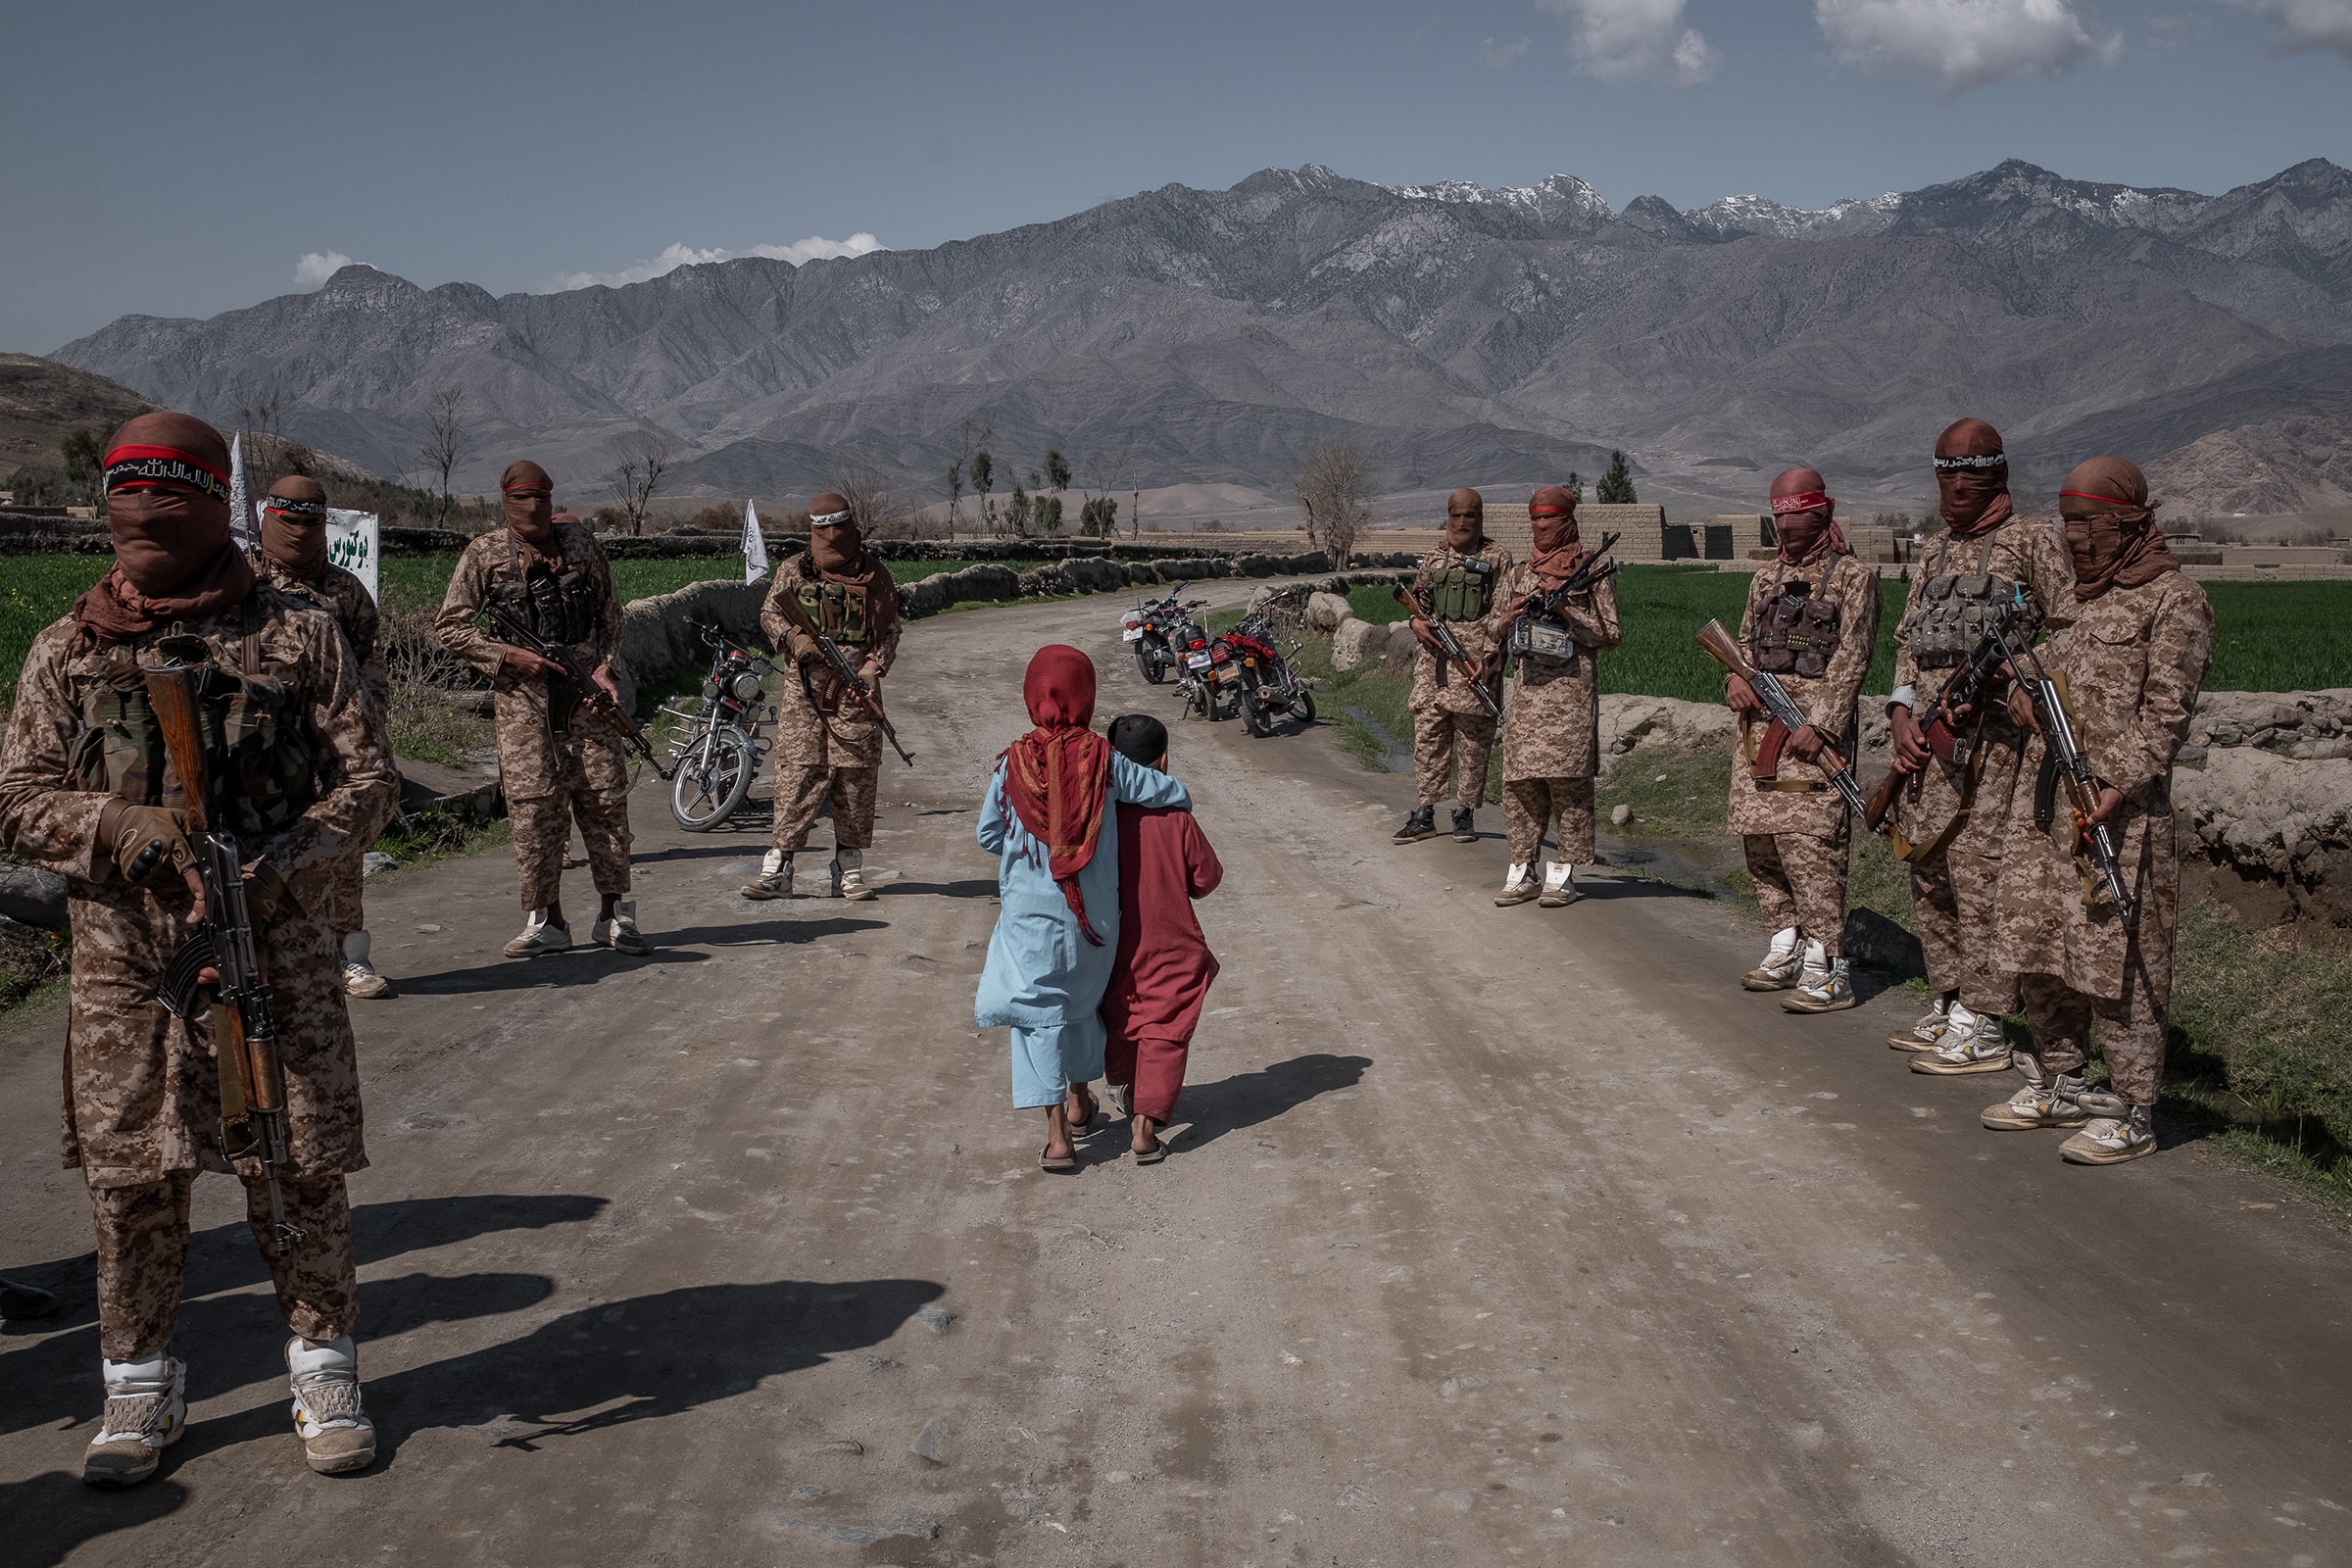 Two children pass members of a Taliban Red Unit, an elite force, in the Alingar District of Afghanistan's Laghman Province in Afghanistan on March 13.